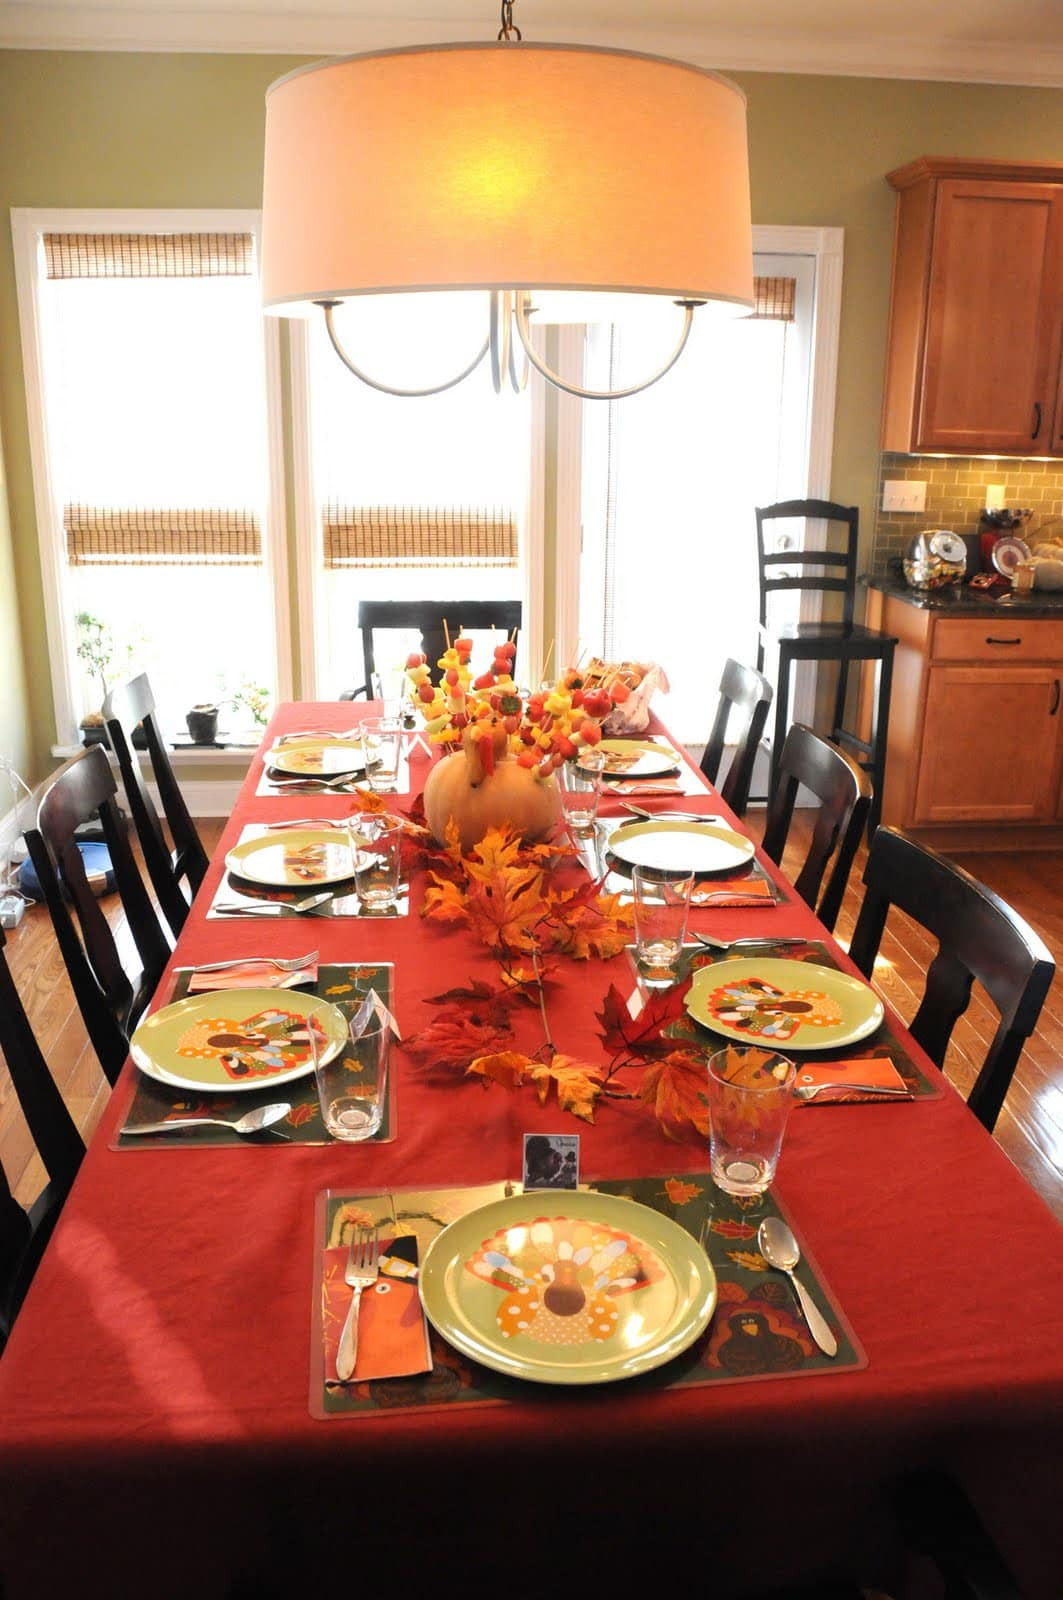 Thanksgiving Table Decorations
 Thanksgiving Decor The Polkadot Chair